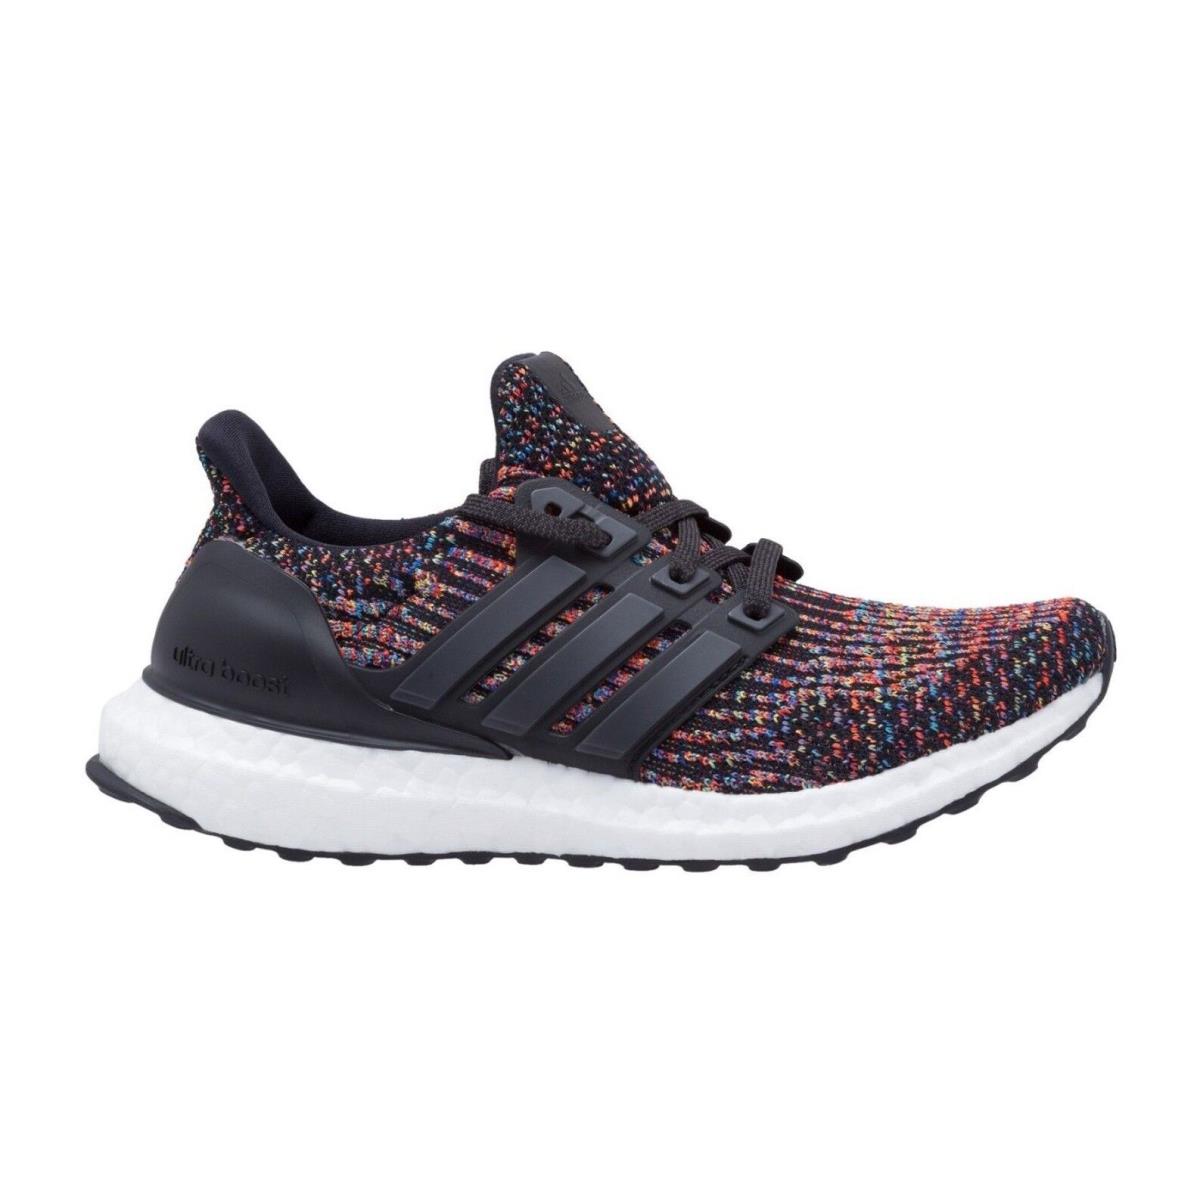 Adidas Ultraboost J Core Black Multicolor Running BY2075 440 Youth Shoes